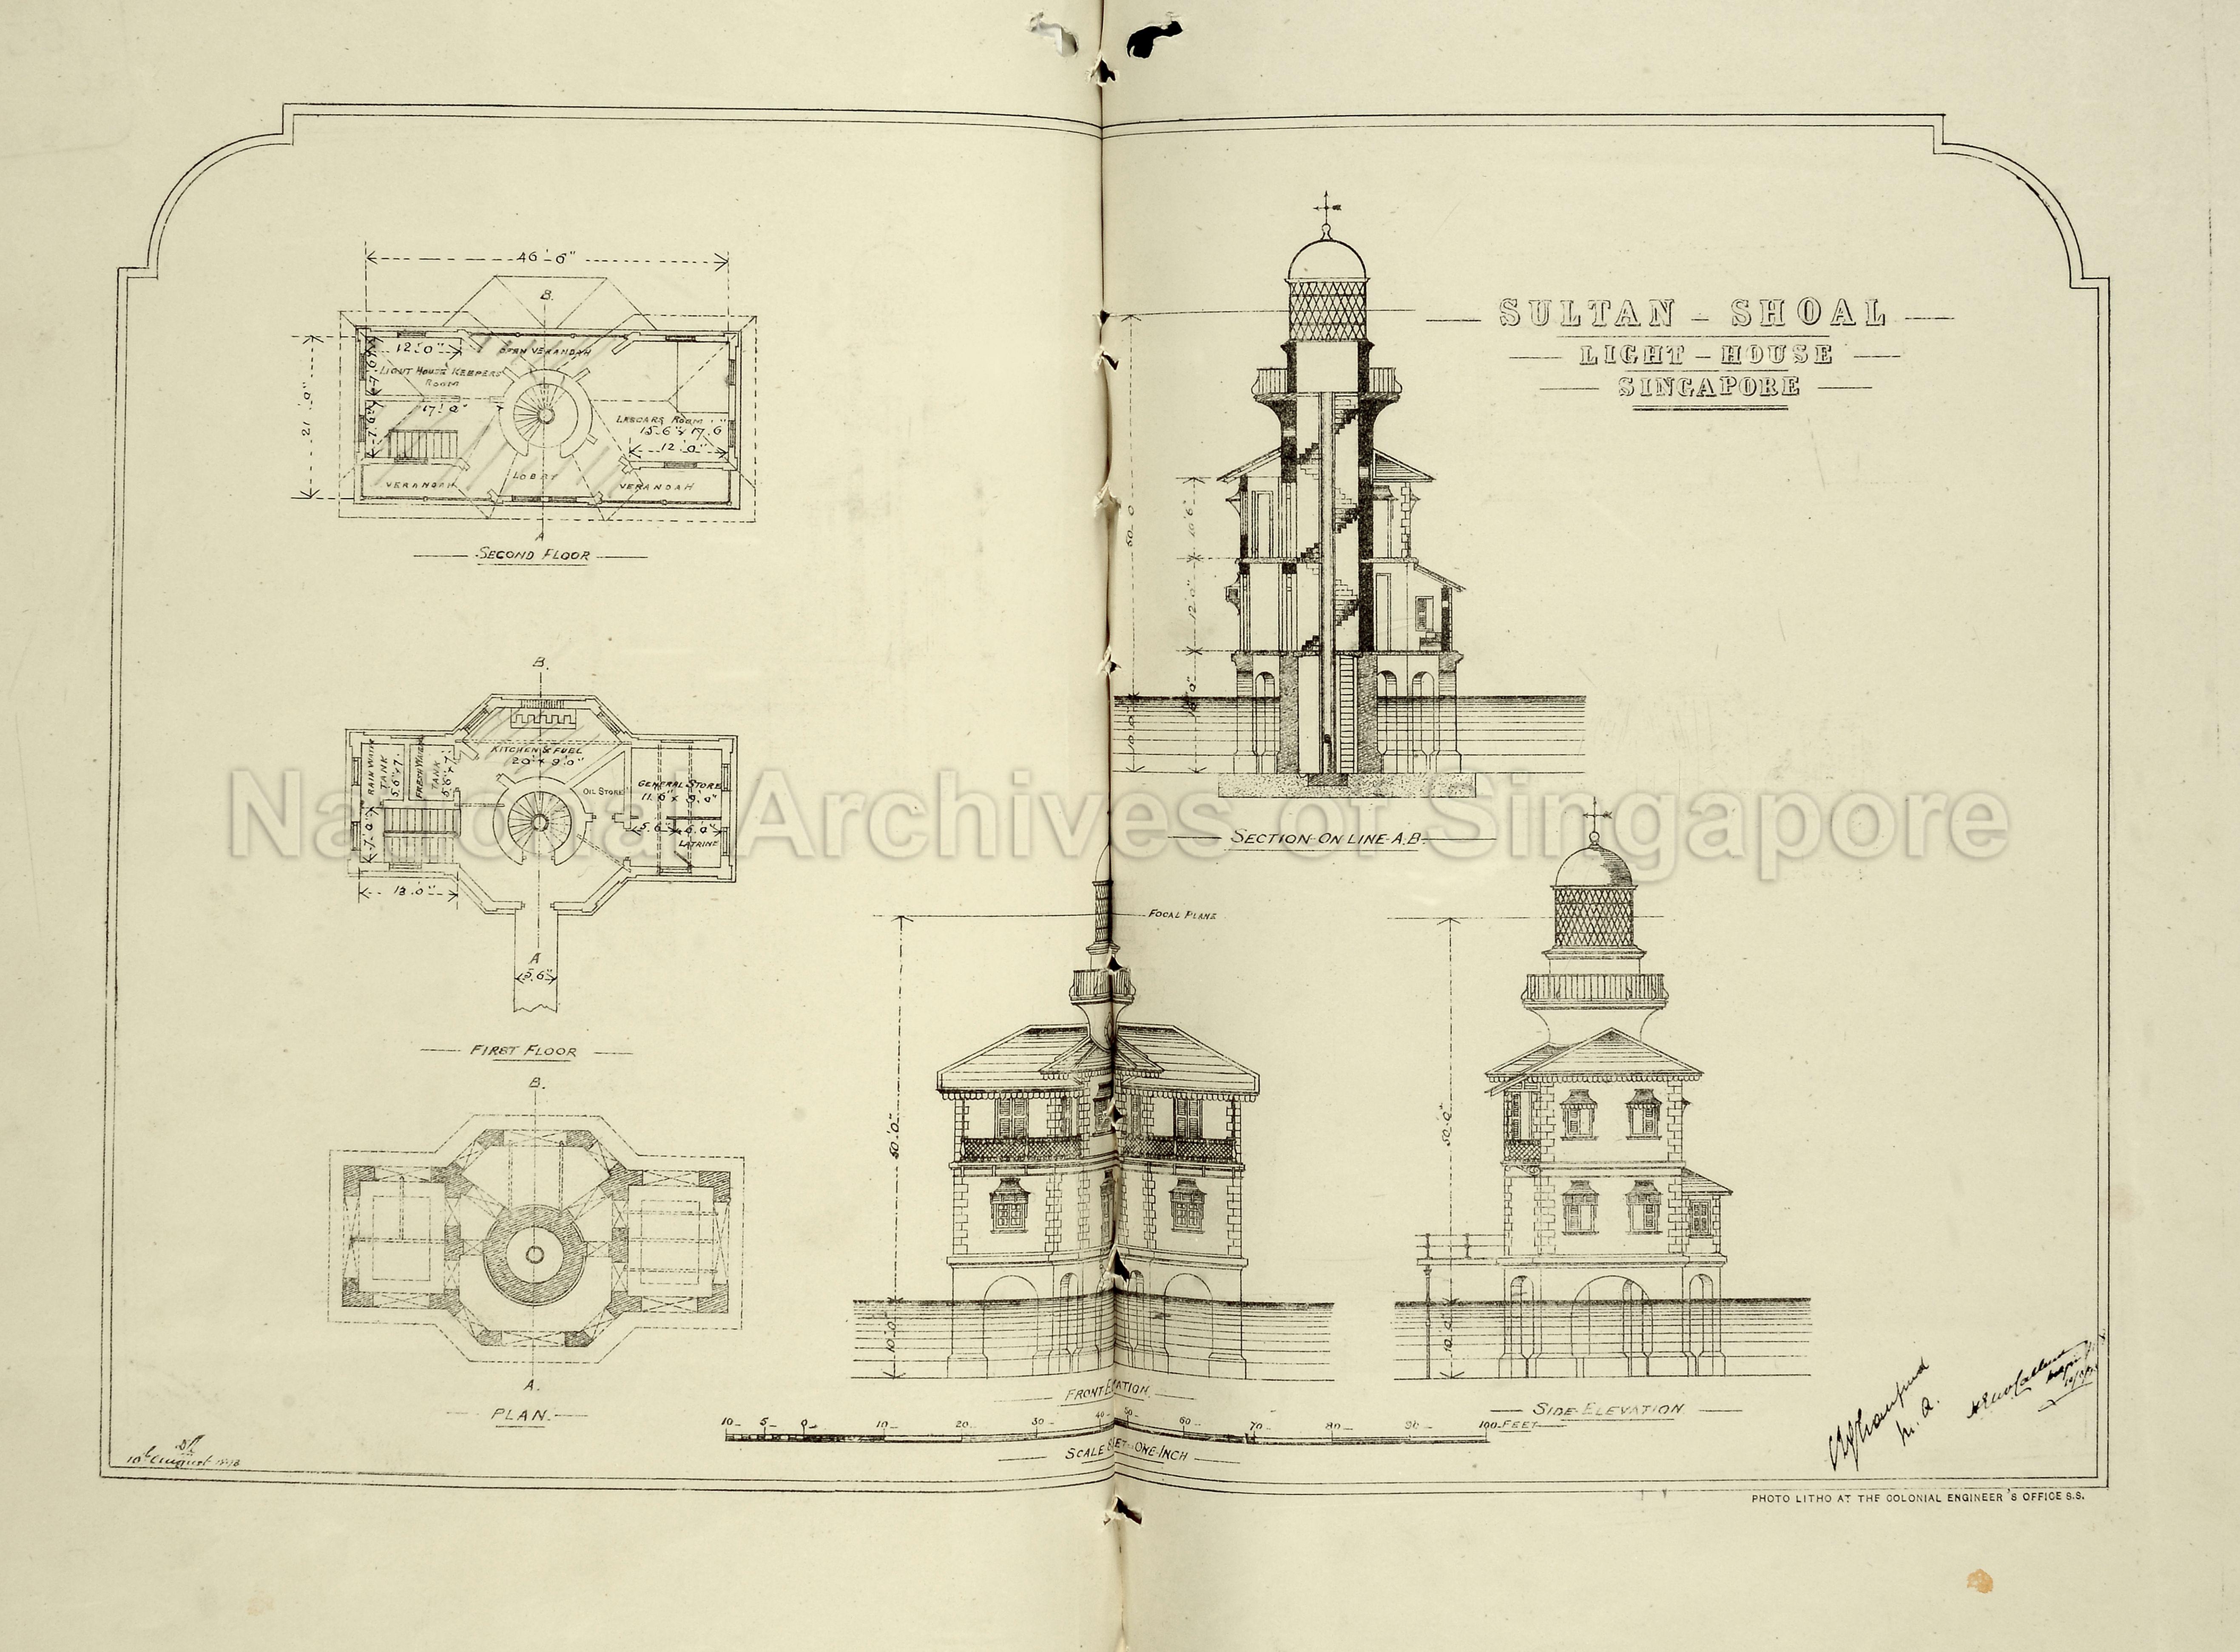 Lighthouse on Sultan Shoal: plans and drawing